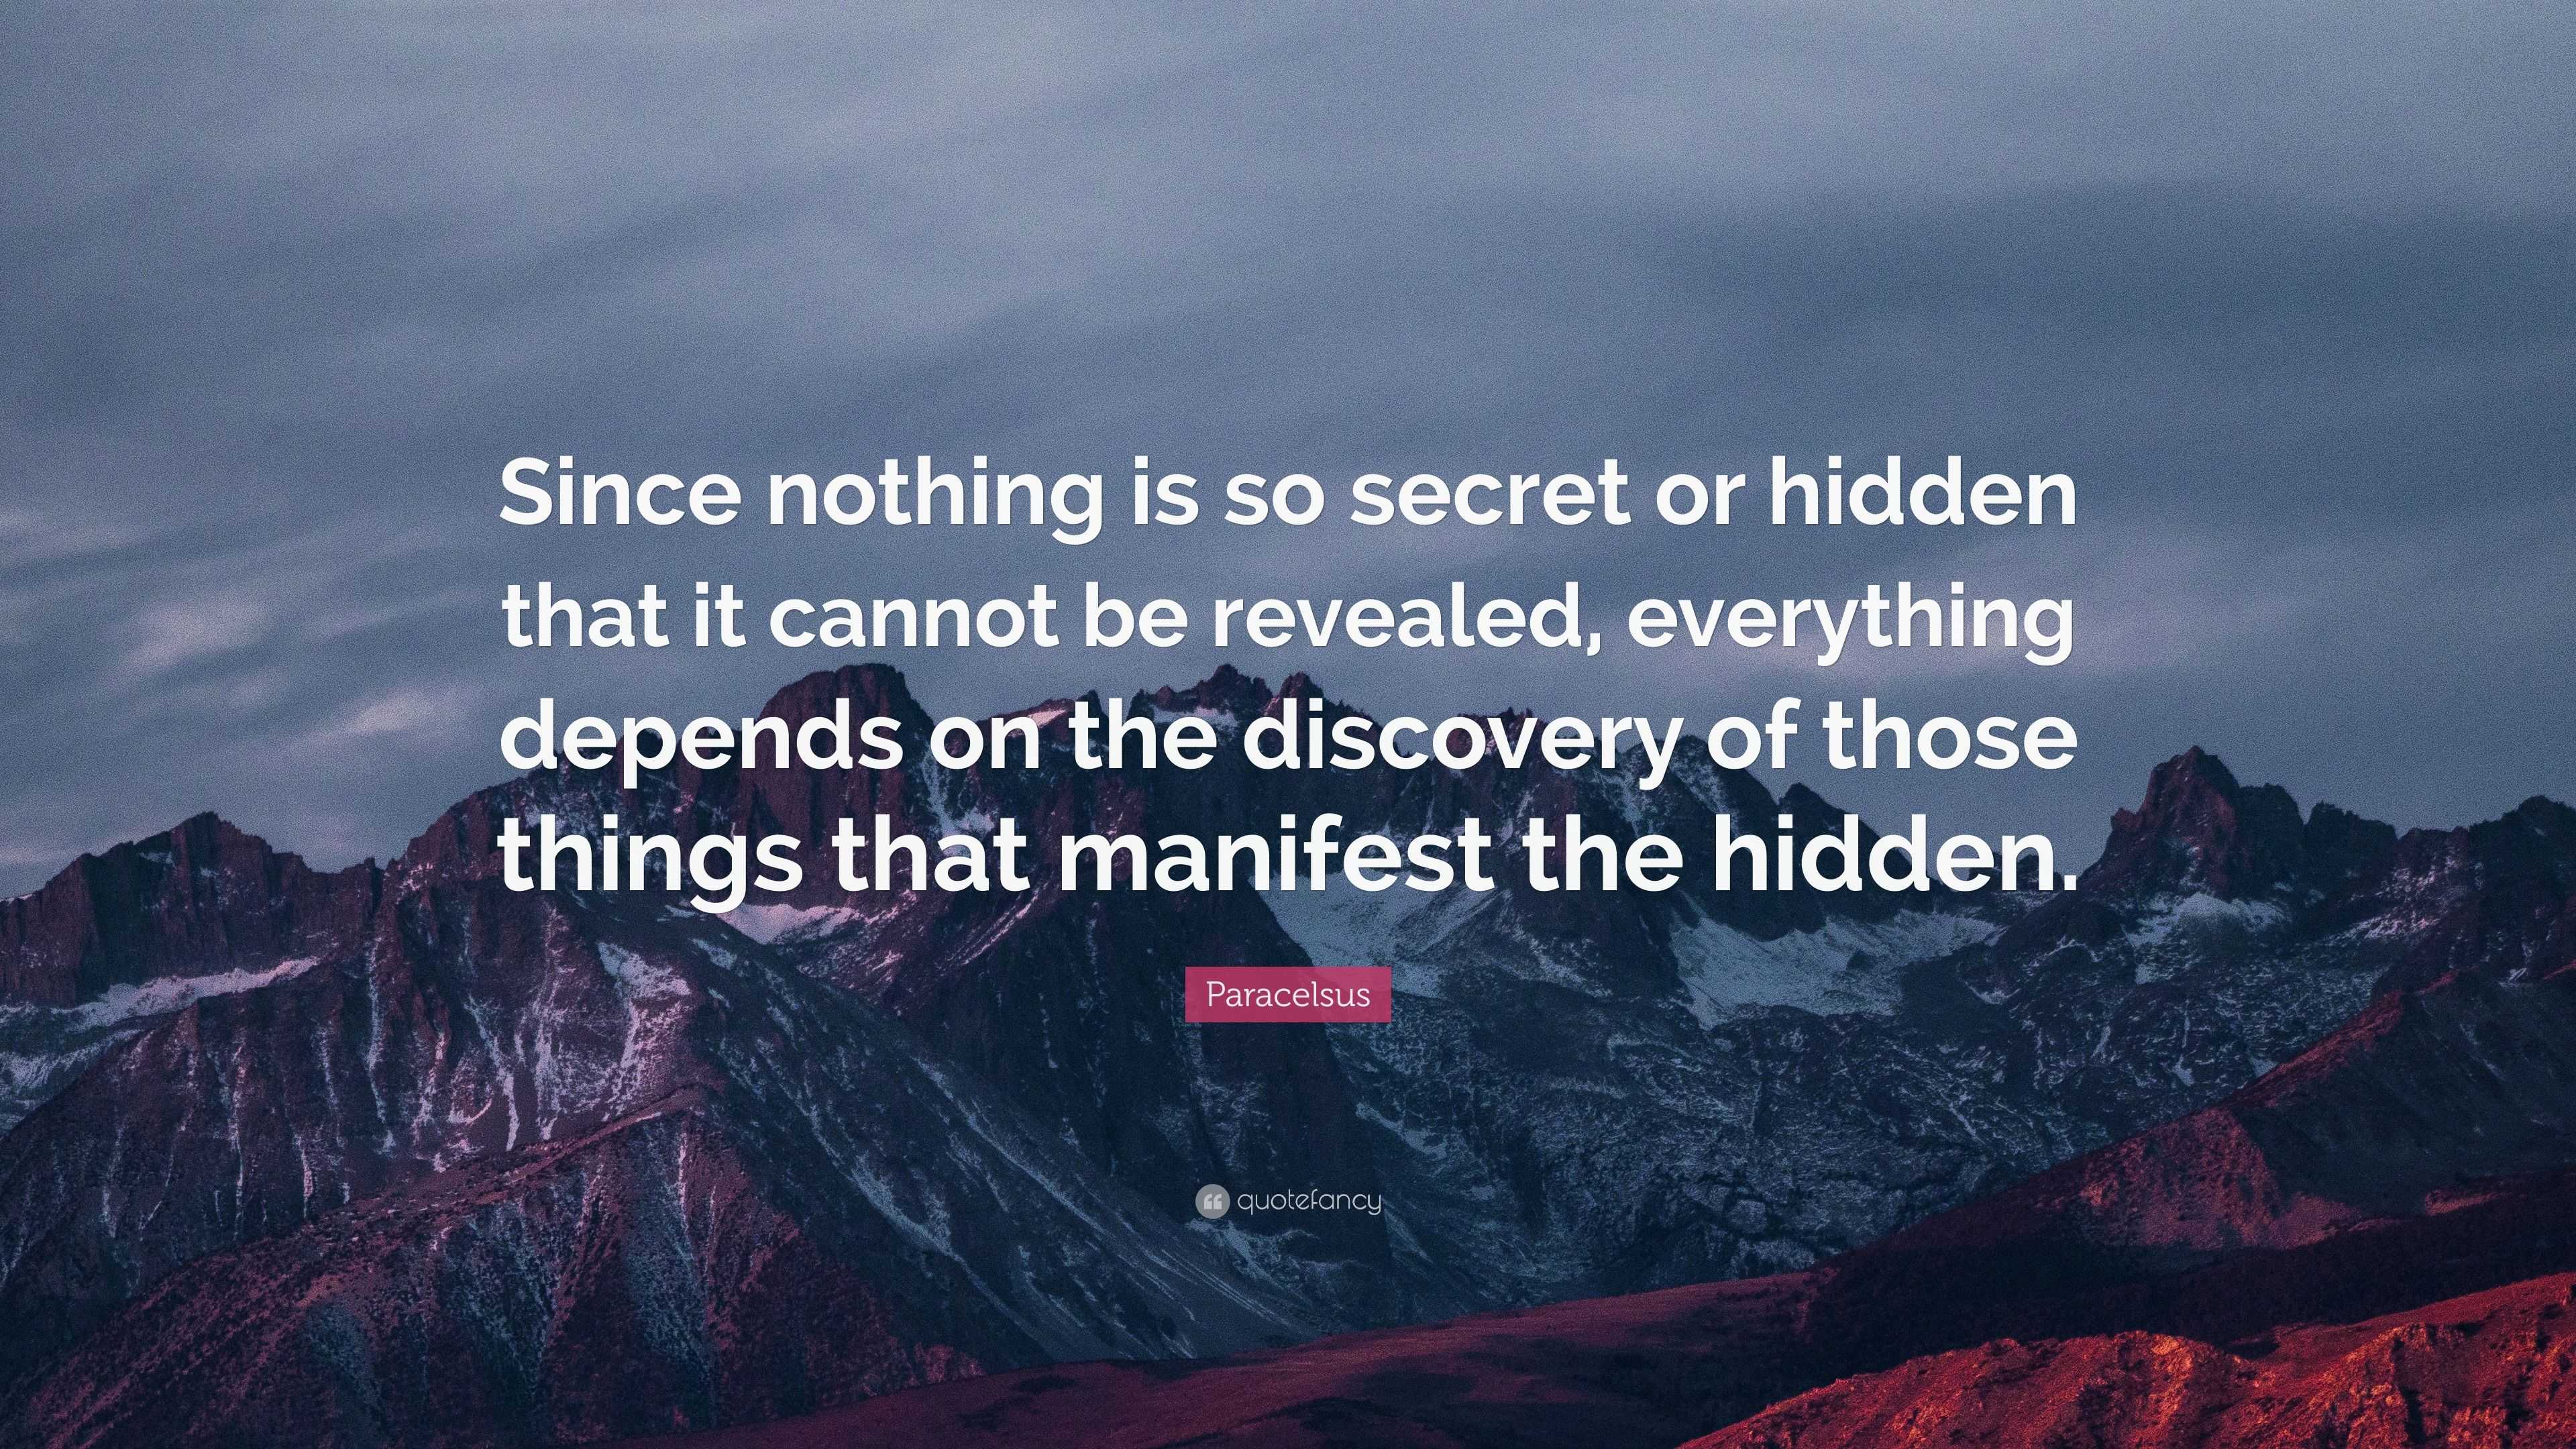 Paracelsus Quote: “Since Nothing Is So Secret Or Hidden That It Cannot Be Revealed, Everything Depends On The Discovery Of Those Things Tha...”